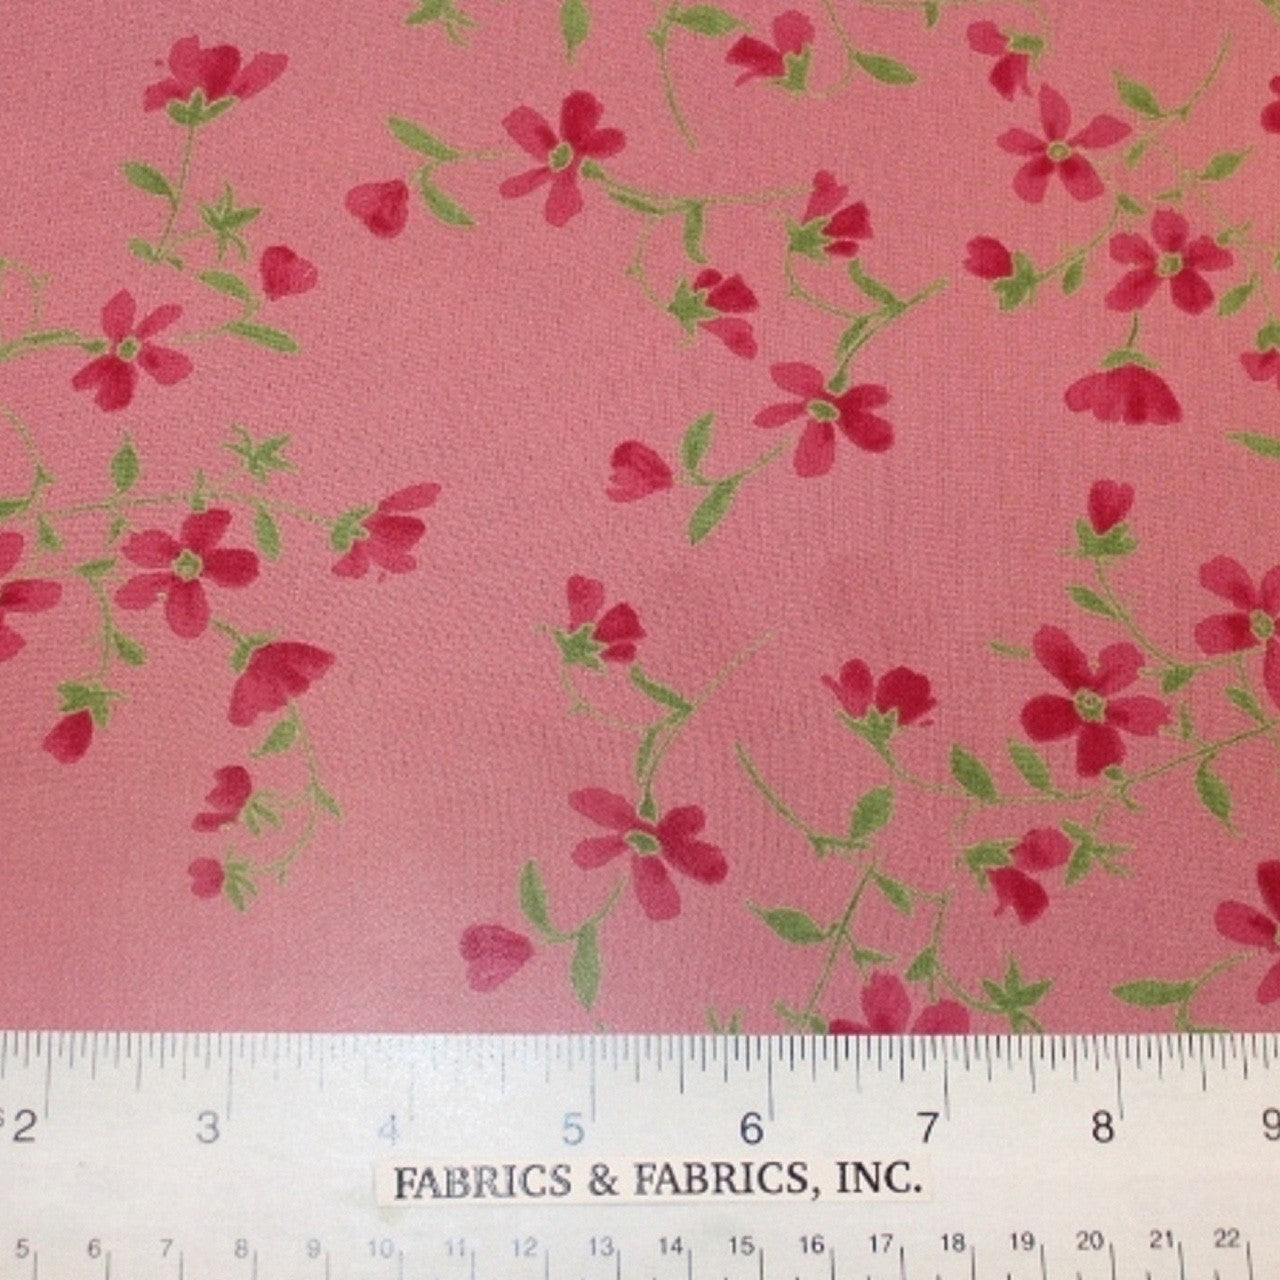 Floral Printed Silk Chiffon - Pink/Red